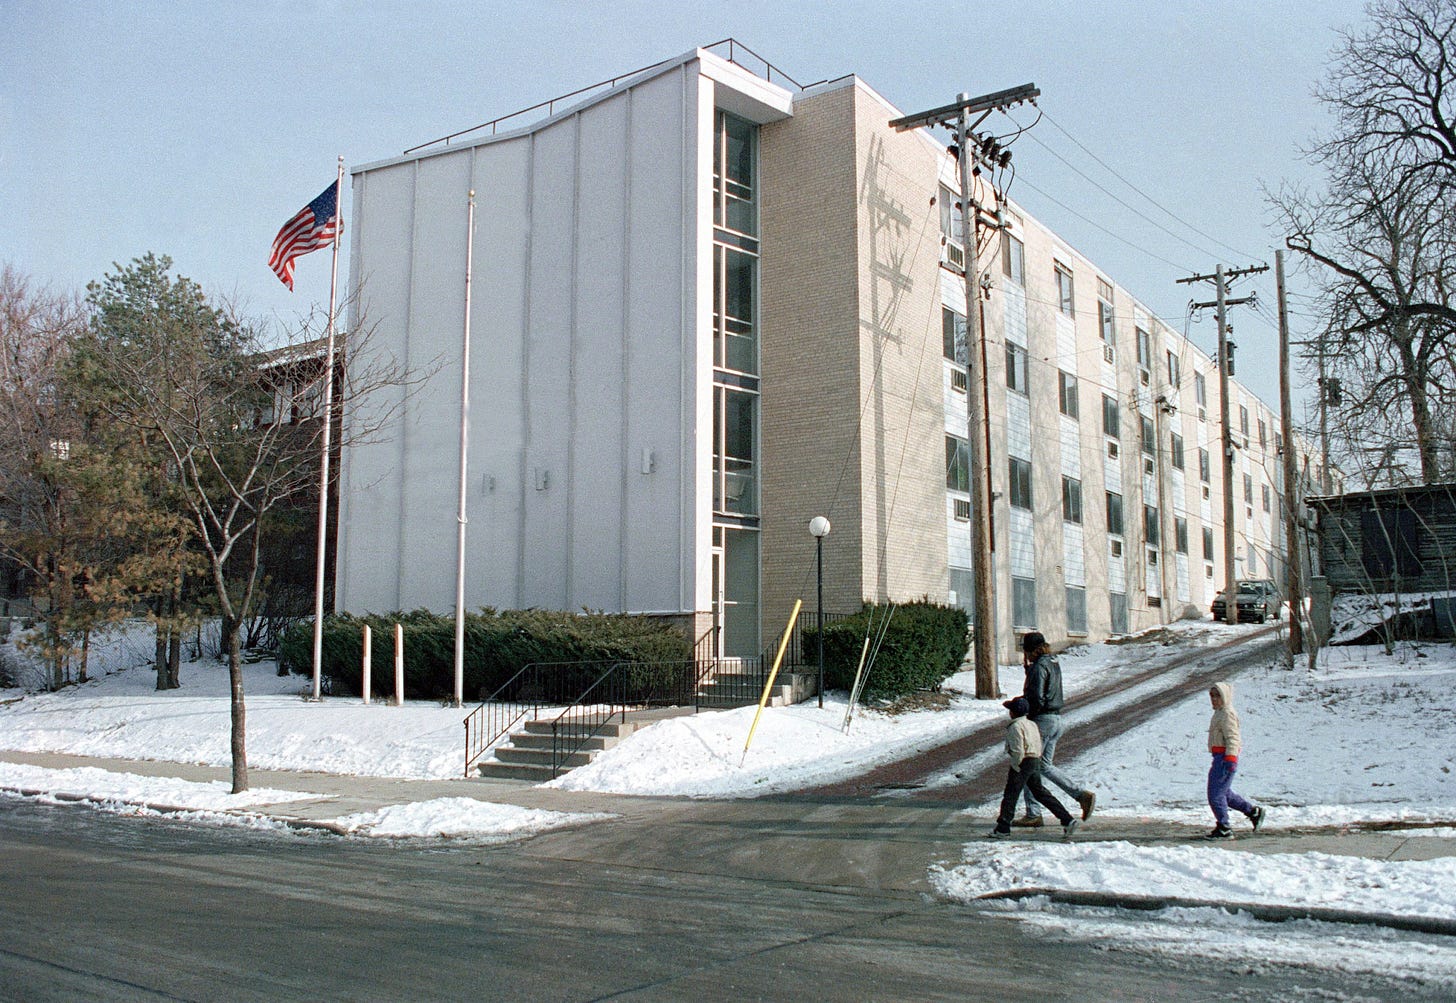 This is the building in 1992 before it was razed